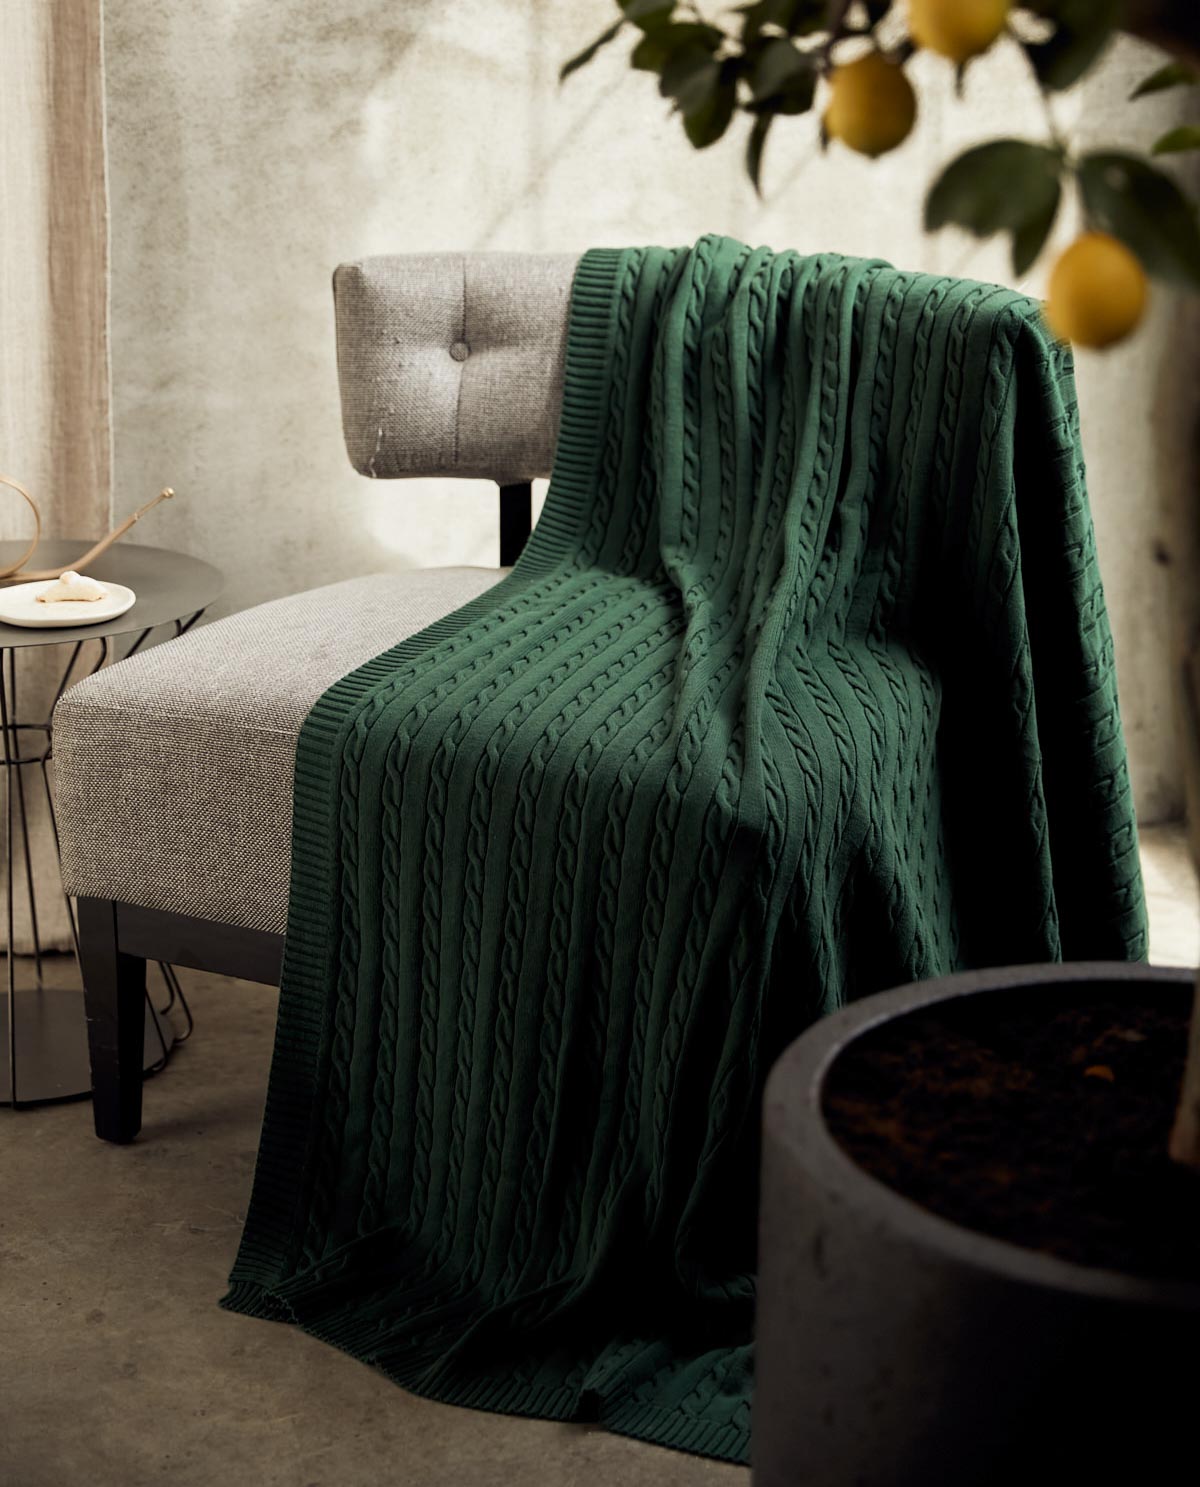 Braid Cable Knitted 100% Cotton Blanket - Dark Green